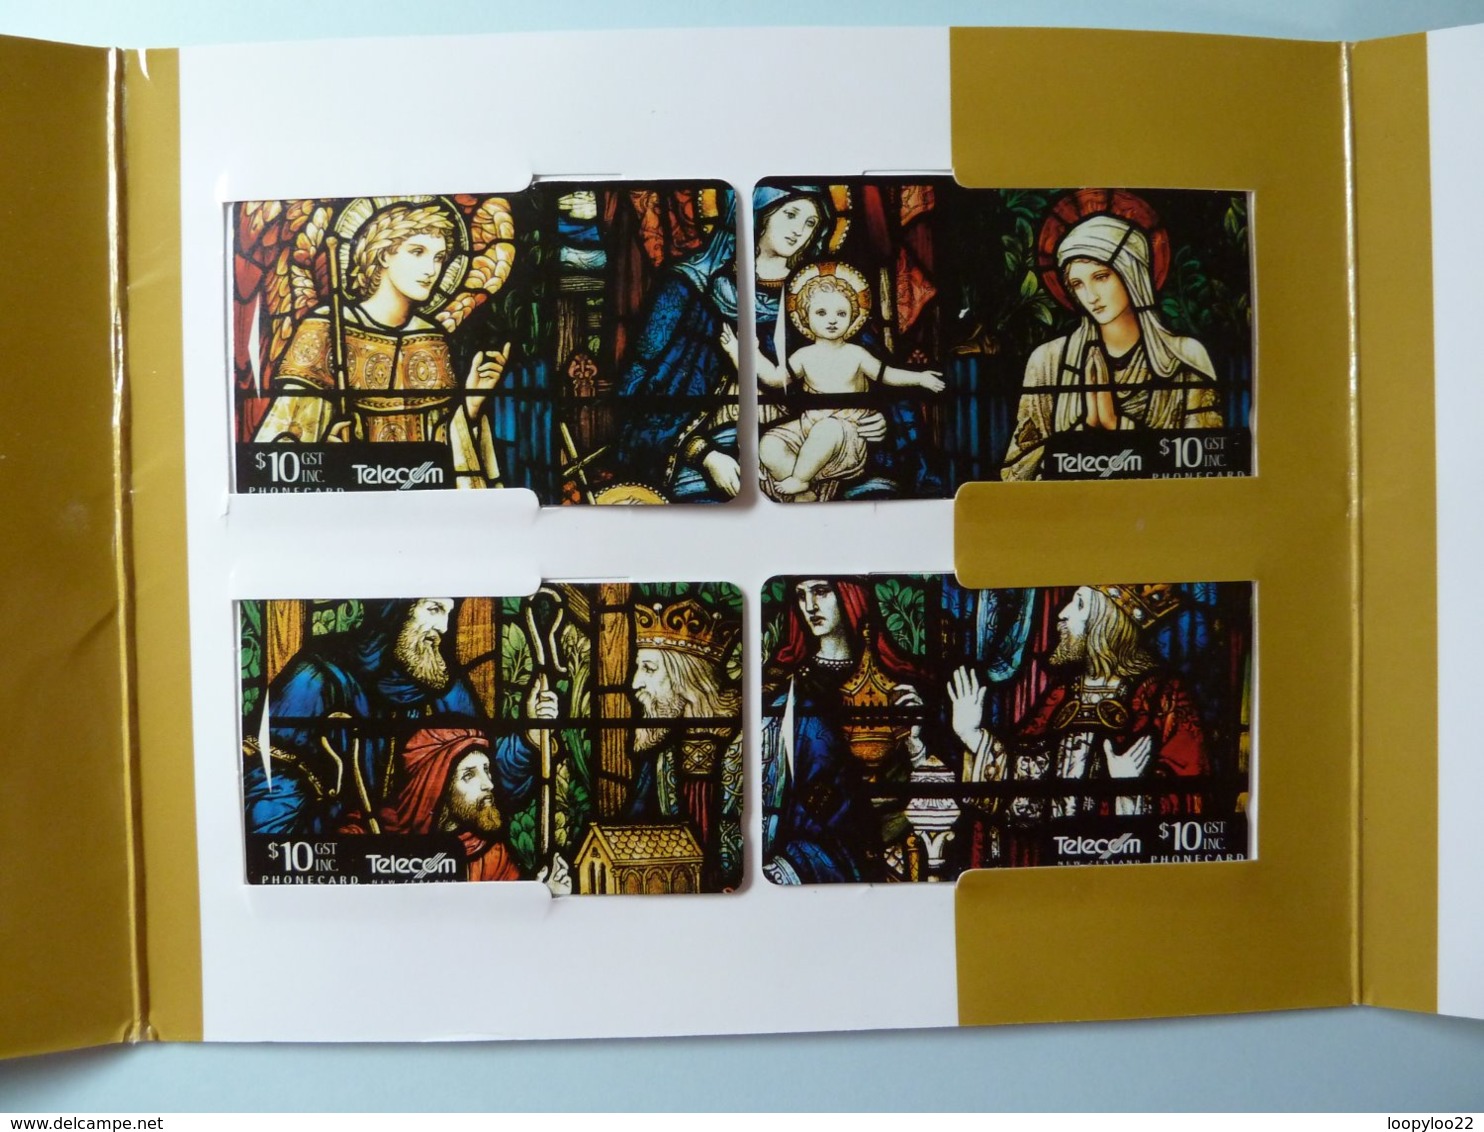 New Zealand - GPT - Stained Glass Windows - Phonecard & Stamp - Limited Edition 3000ex & Certificate - Mint In Folder - Nieuw-Zeeland